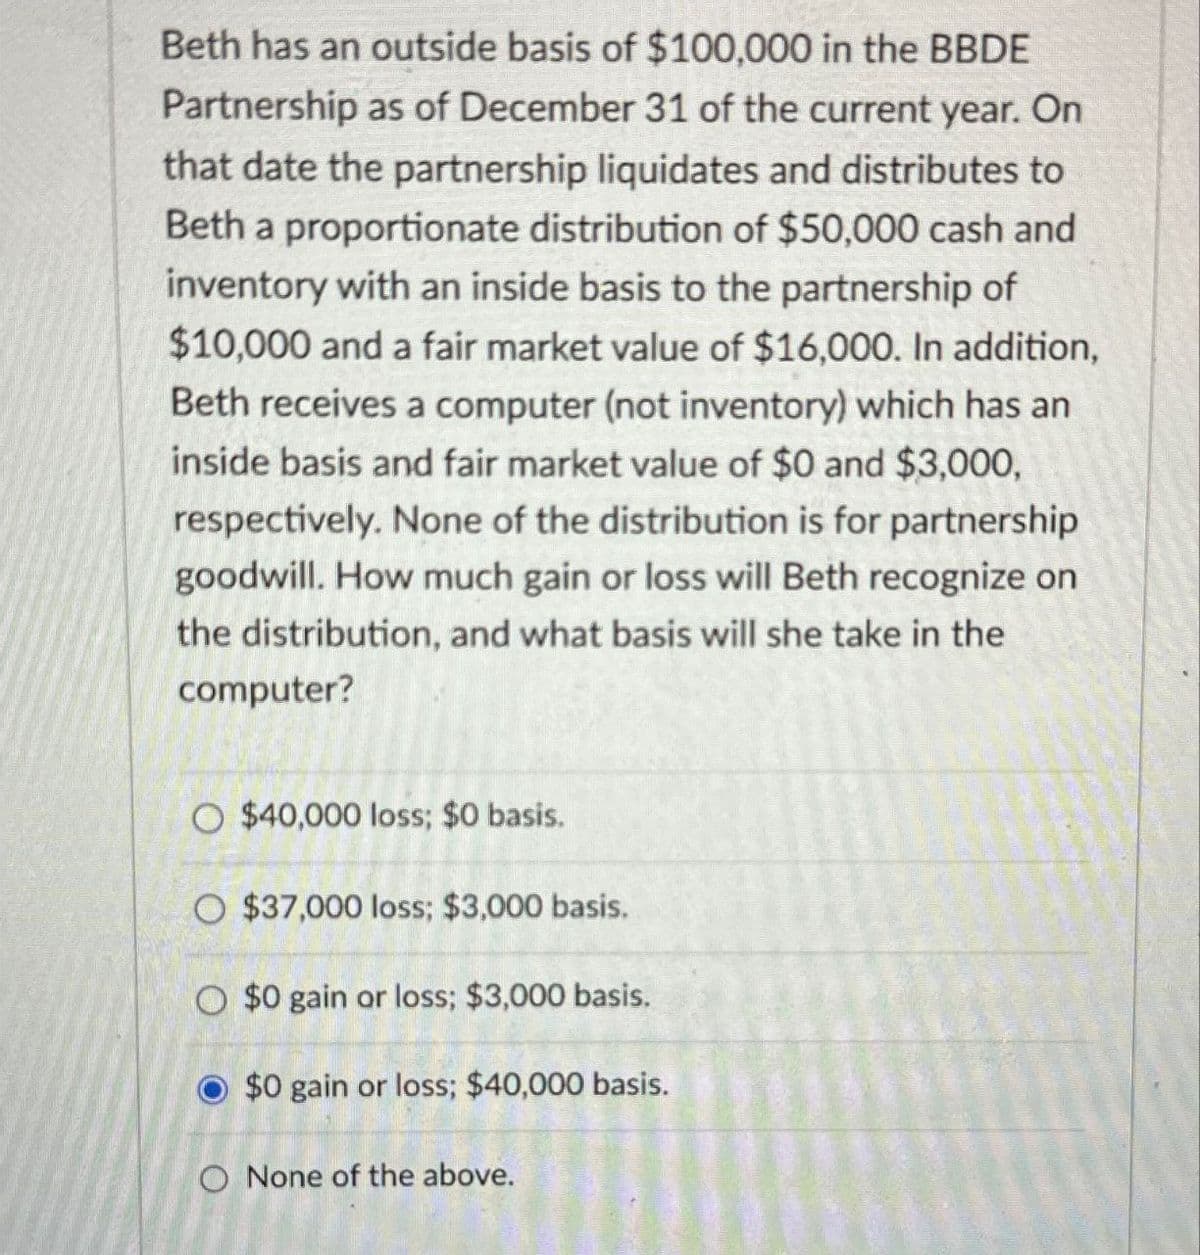 Beth has an outside basis of $100,000 in the BBDE
Partnership as of December 31 of the current year. On
that date the partnership liquidates and distributes to
Beth a proportionate distribution of $50,000 cash and
inventory with an inside basis to the partnership of
$10,000 and a fair market value of $16,000. In addition,
Beth receives a computer (not inventory) which has an
inside basis and fair market value of $0 and $3,000,
respectively. None of the distribution is for partnership
goodwill. How much gain or loss will Beth recognize on
the distribution, and what basis will she take in the
computer?
O $40,000 loss; $0 basis.
O $37,000 loss; $3,000 basis.
O $0 gain or loss; $3,000 basis.
$0 gain or loss; $40,000 basis.
O None of the above.